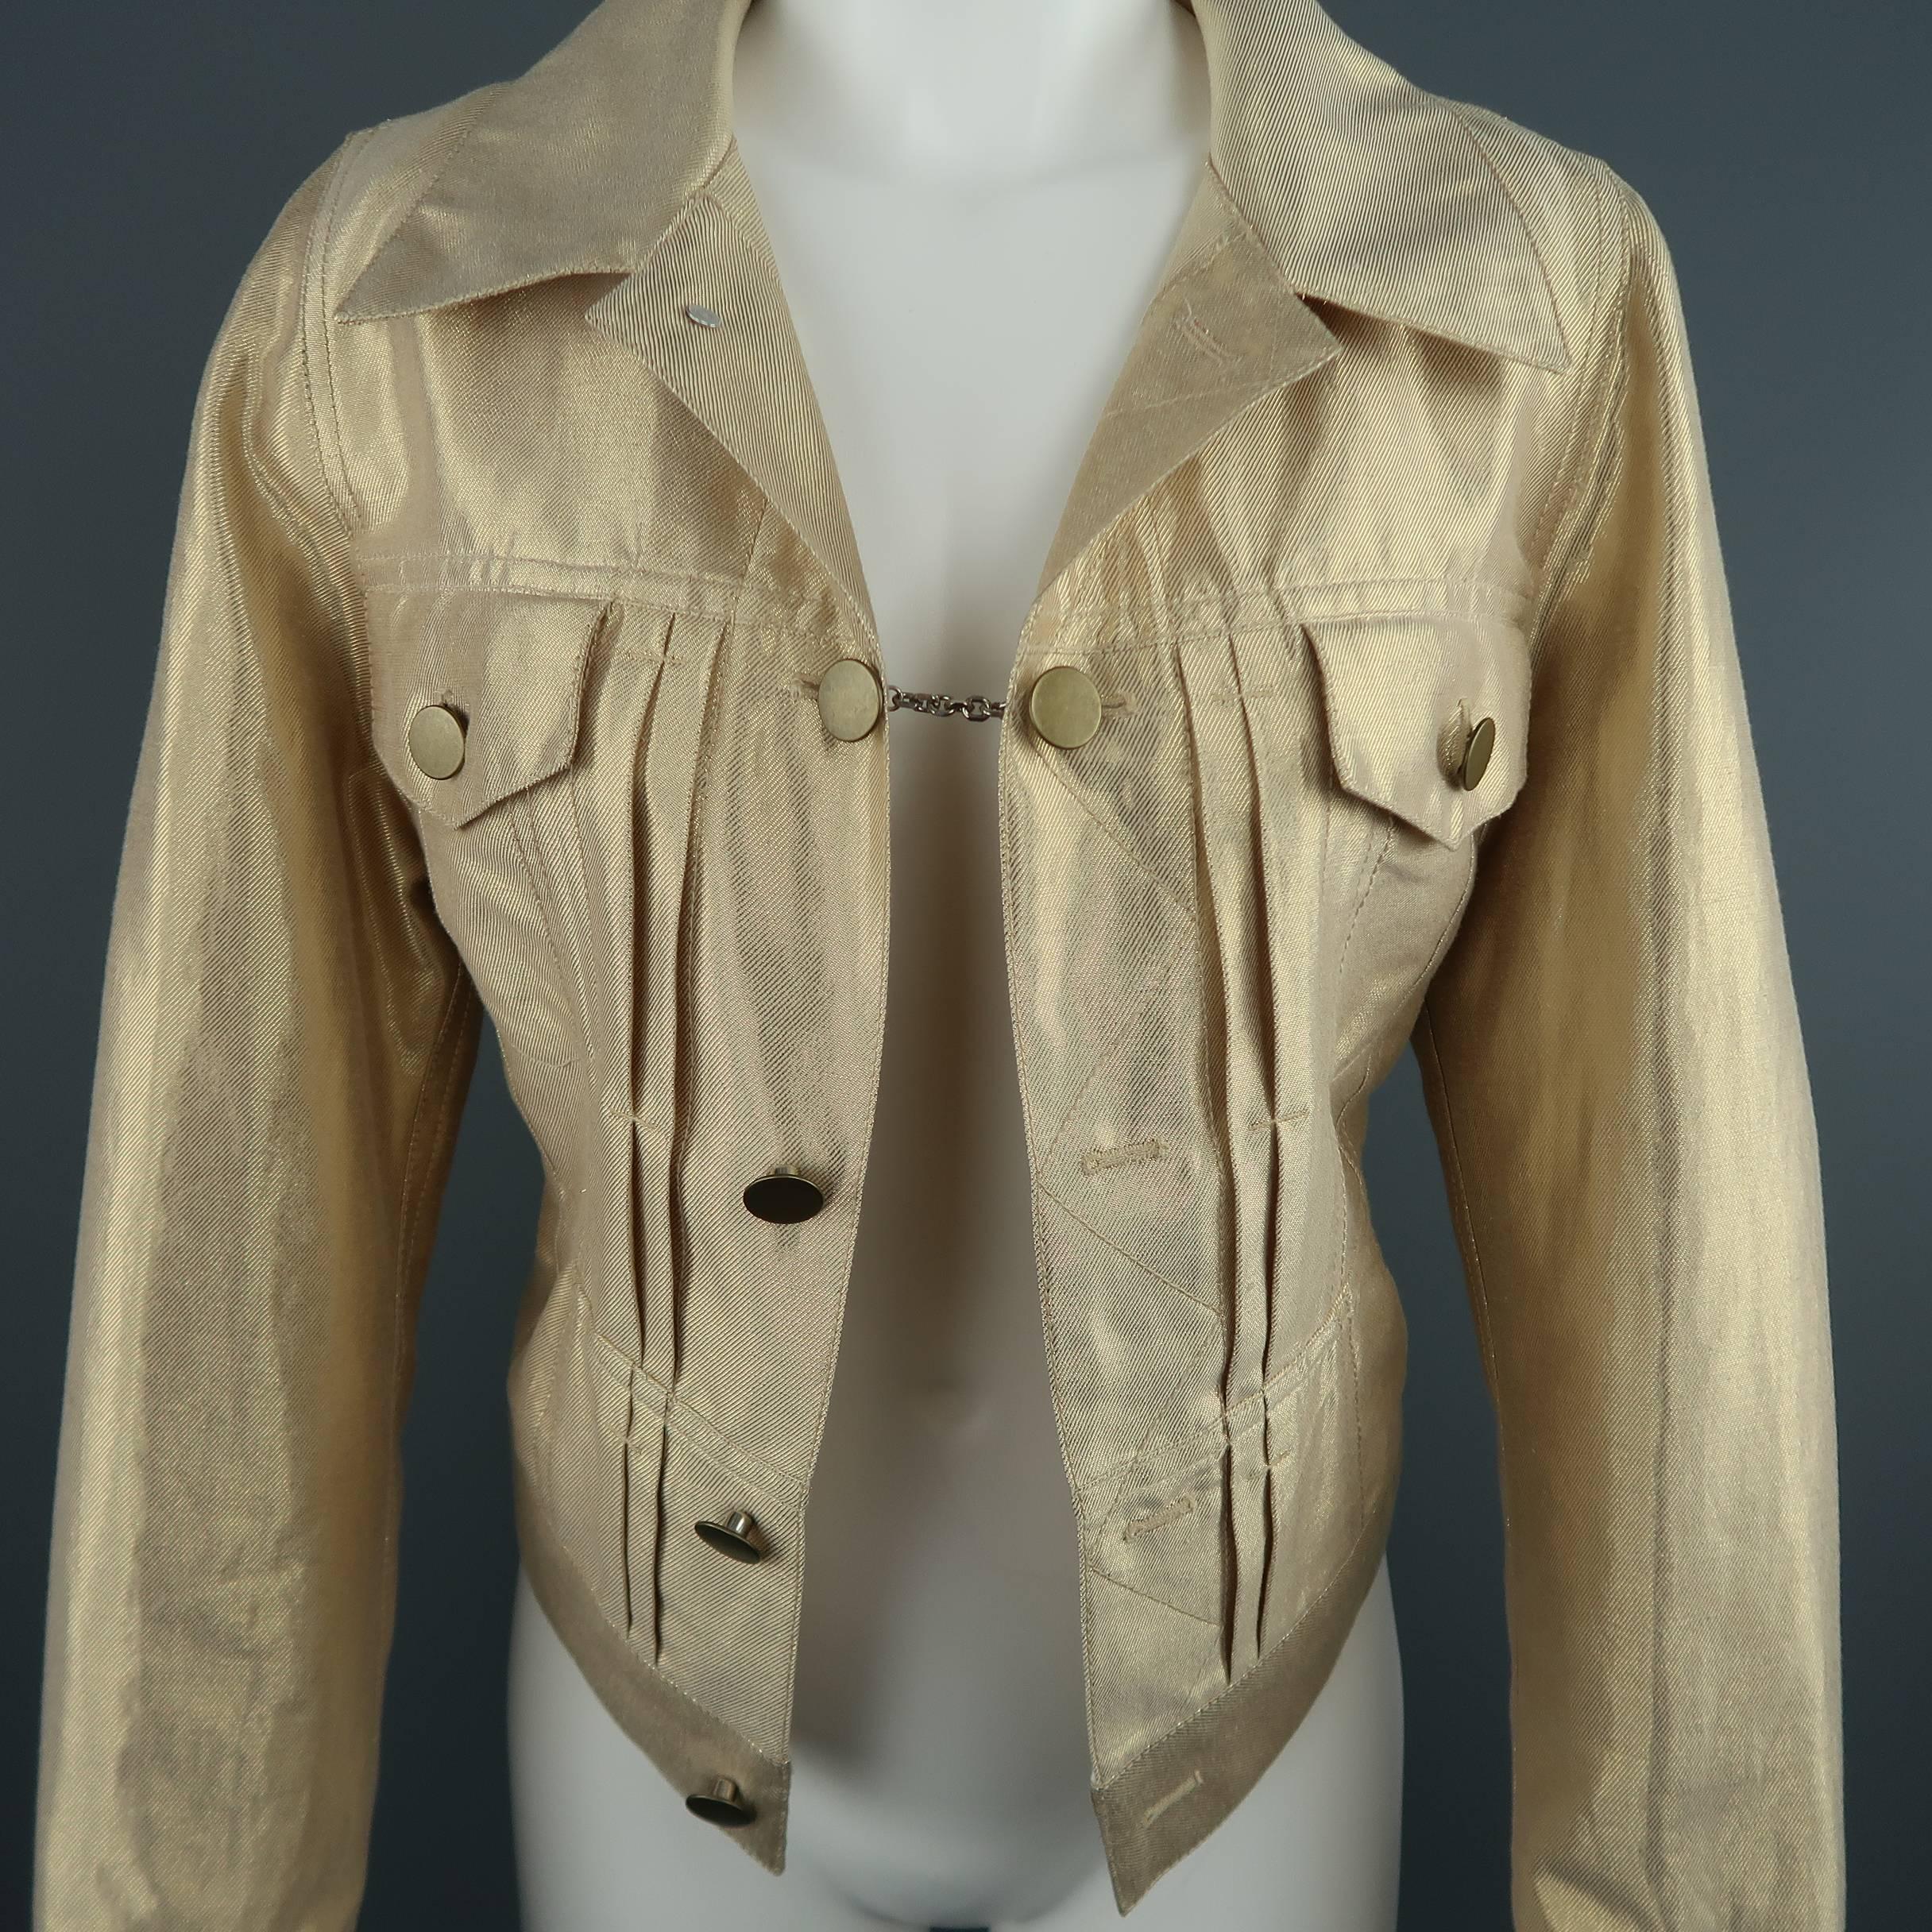 This fabulous MARC JACOBS jacket comes in a metallic gold foil blend linen twill and features a reworked denim trucker style construction with an open front, pleated details, double flap pockets, pointed collar, single chain closure, and unique